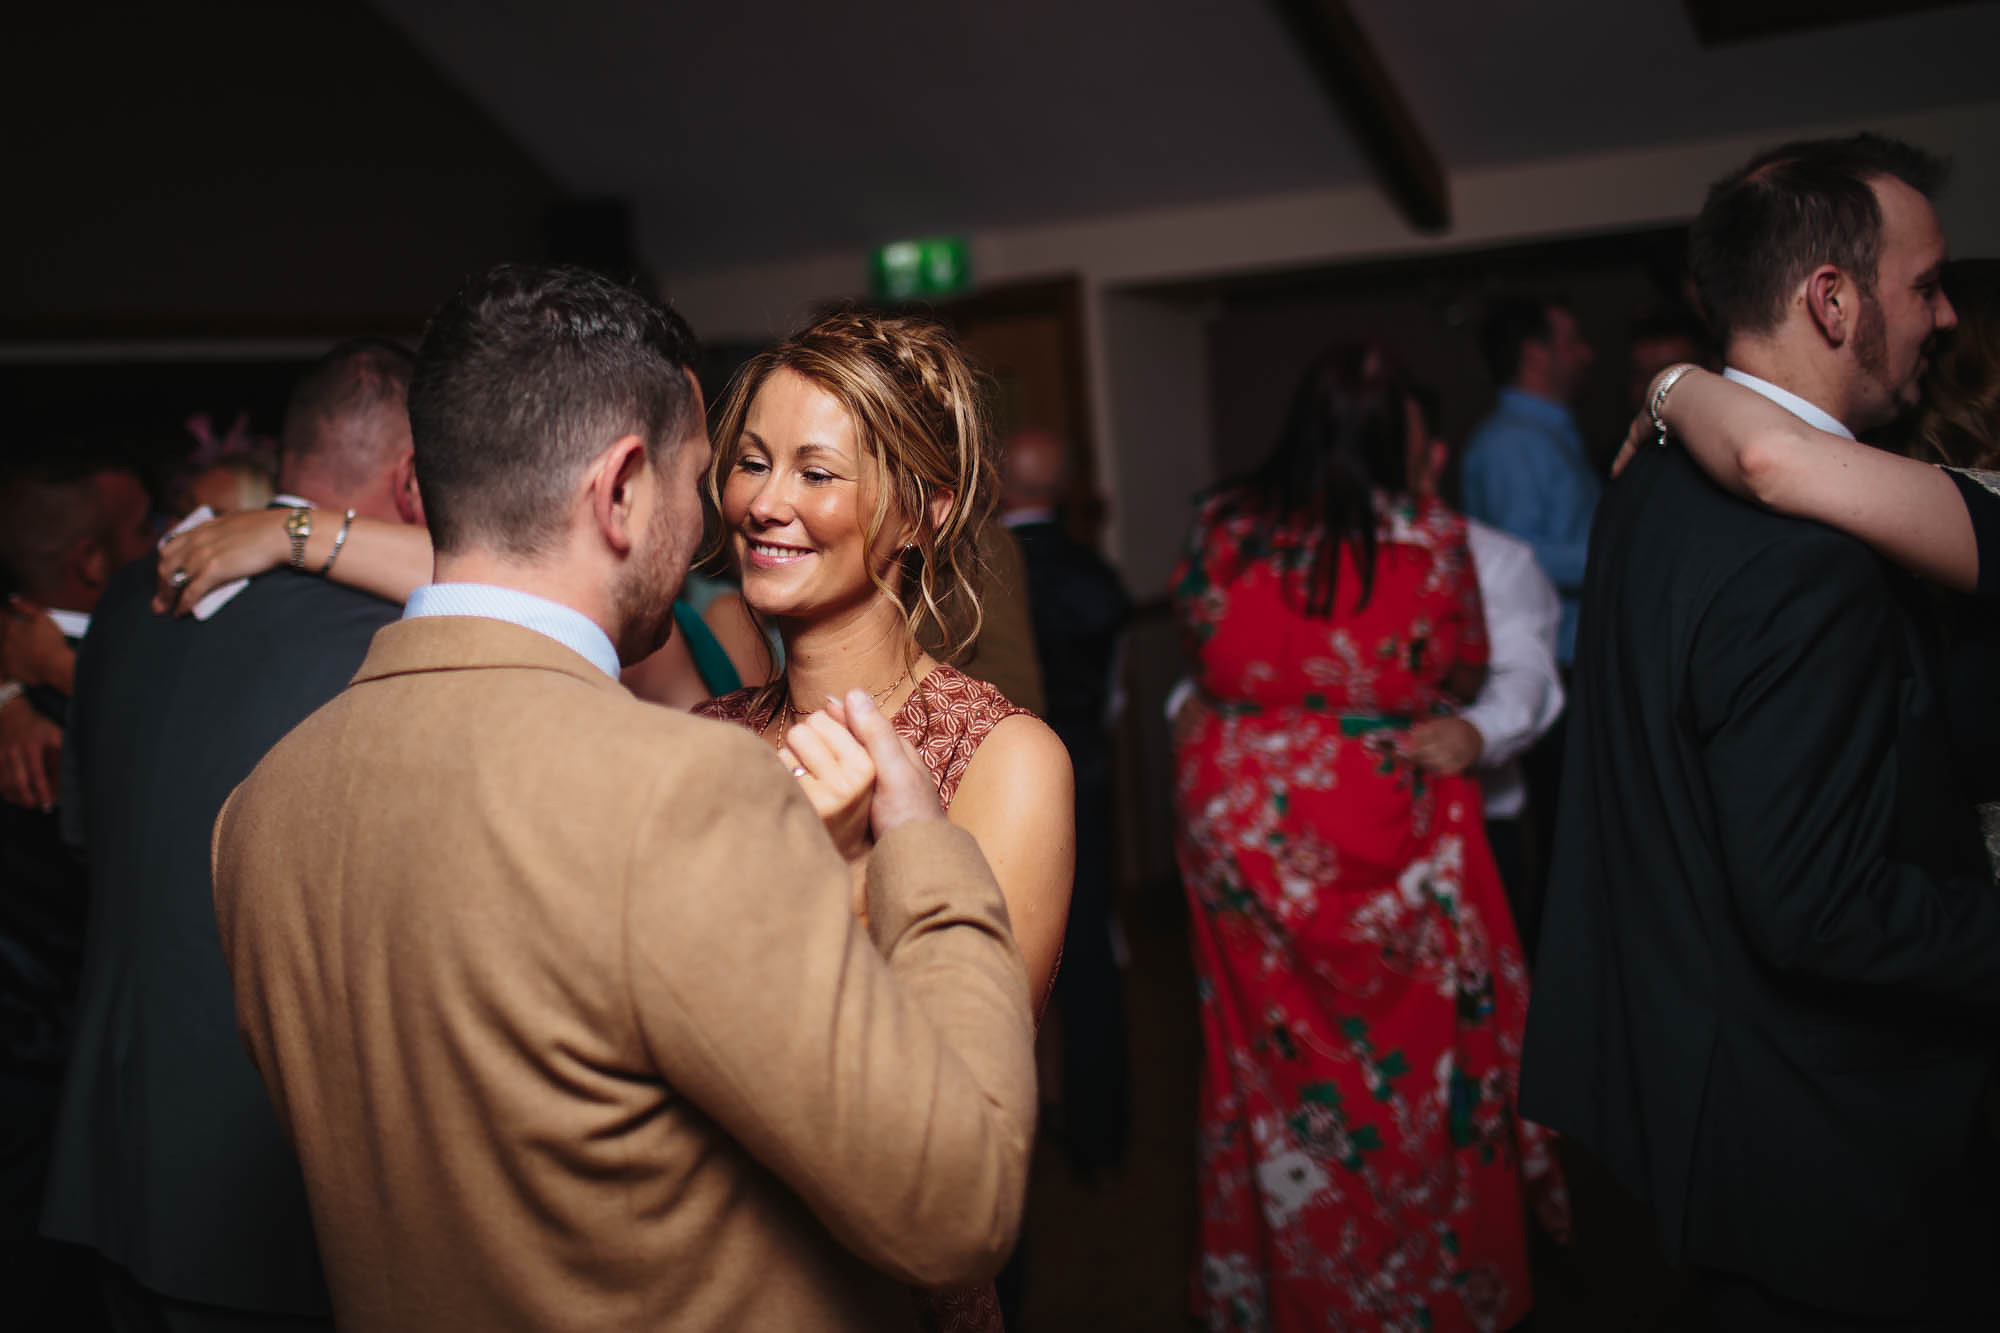 Guests dancing at a wedding party in Manchester